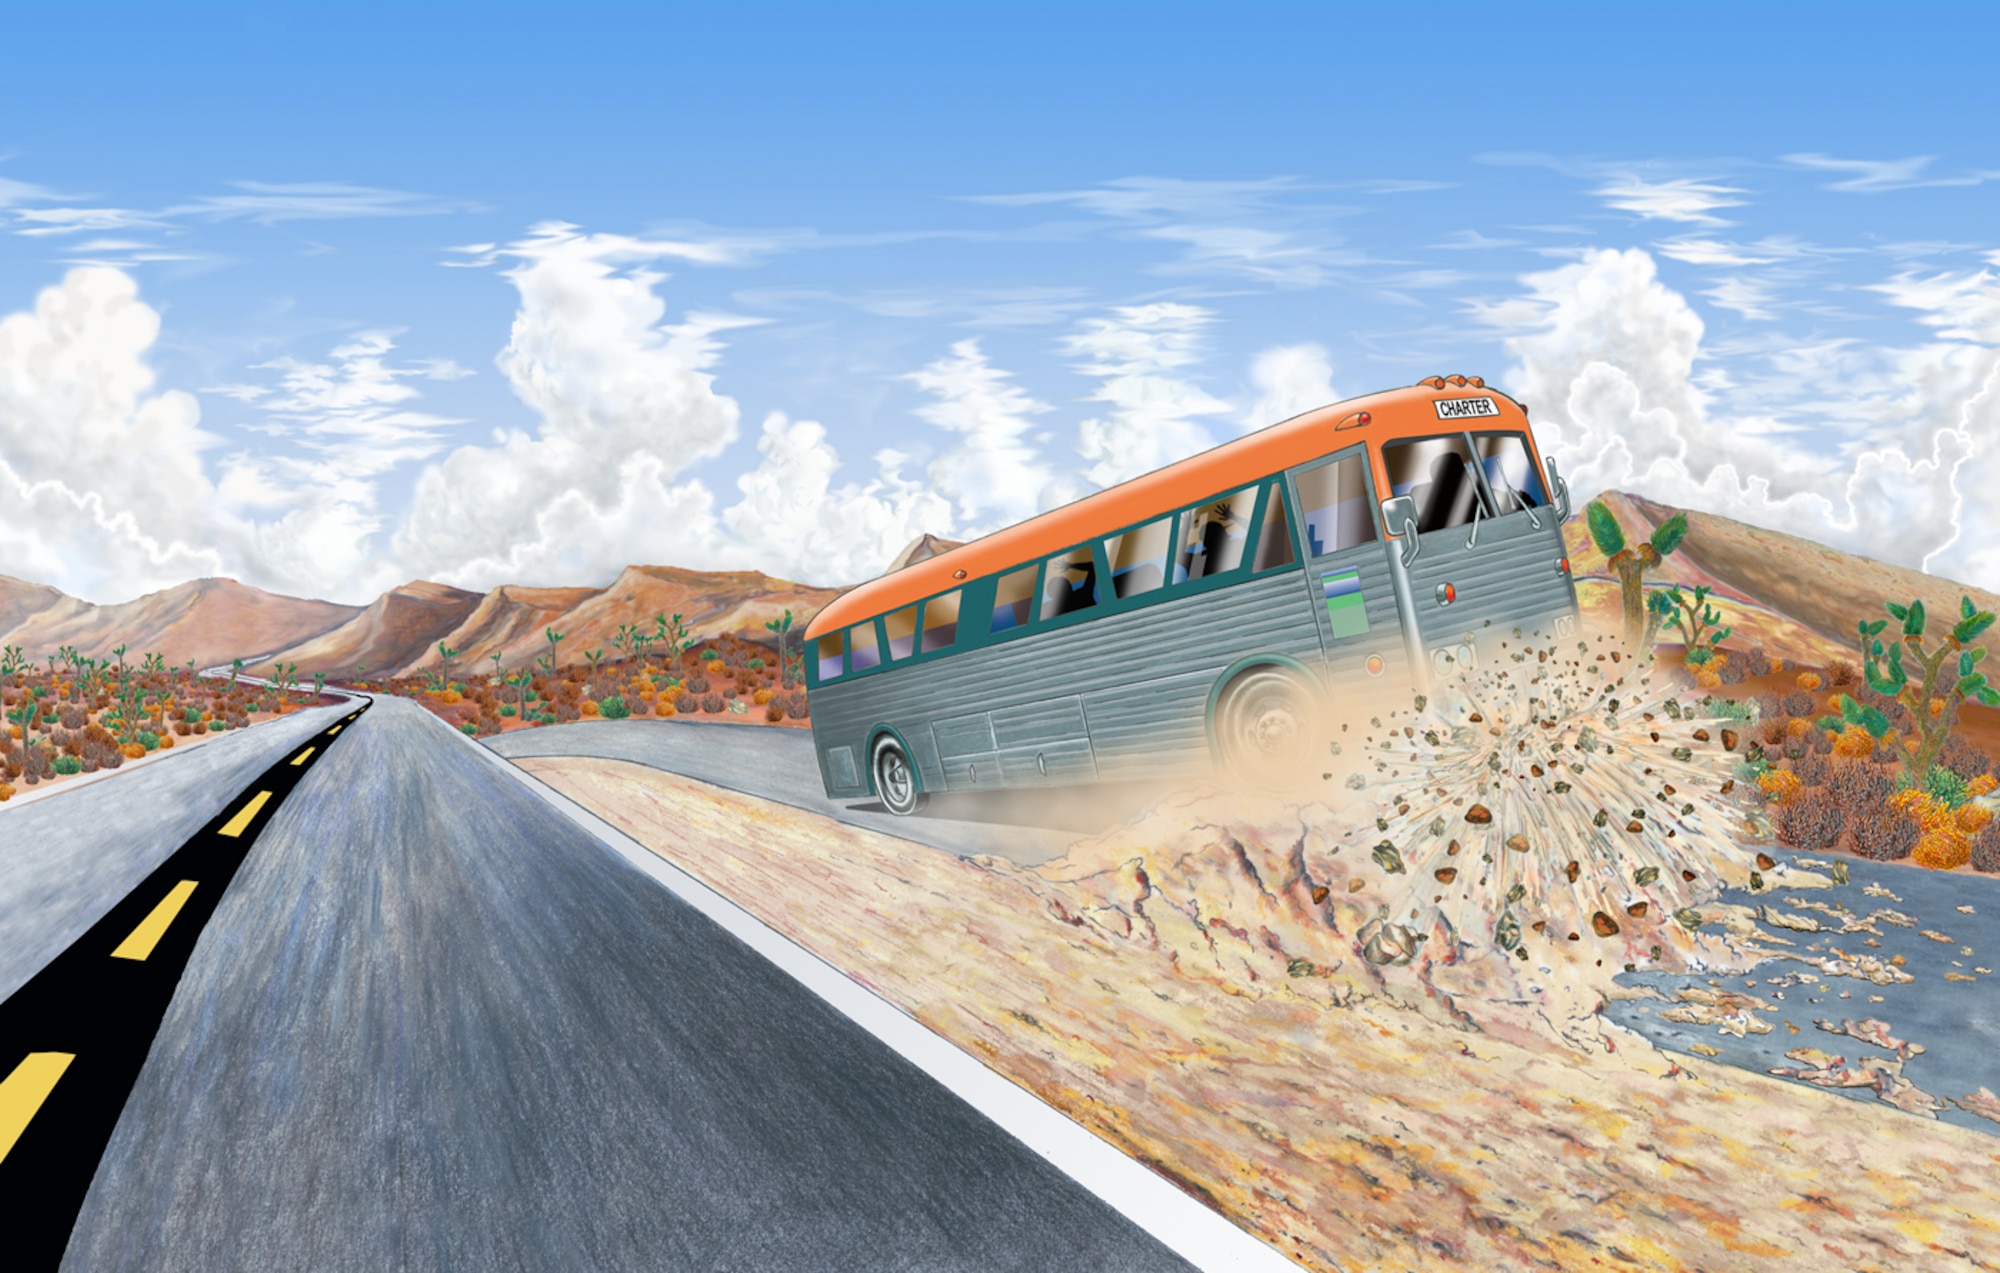 DISASTER IN THE DESERT - Bus crash survivor and Air Force helicopter crew that saved her are forever linked. (Color illustration by Sammie W. King)